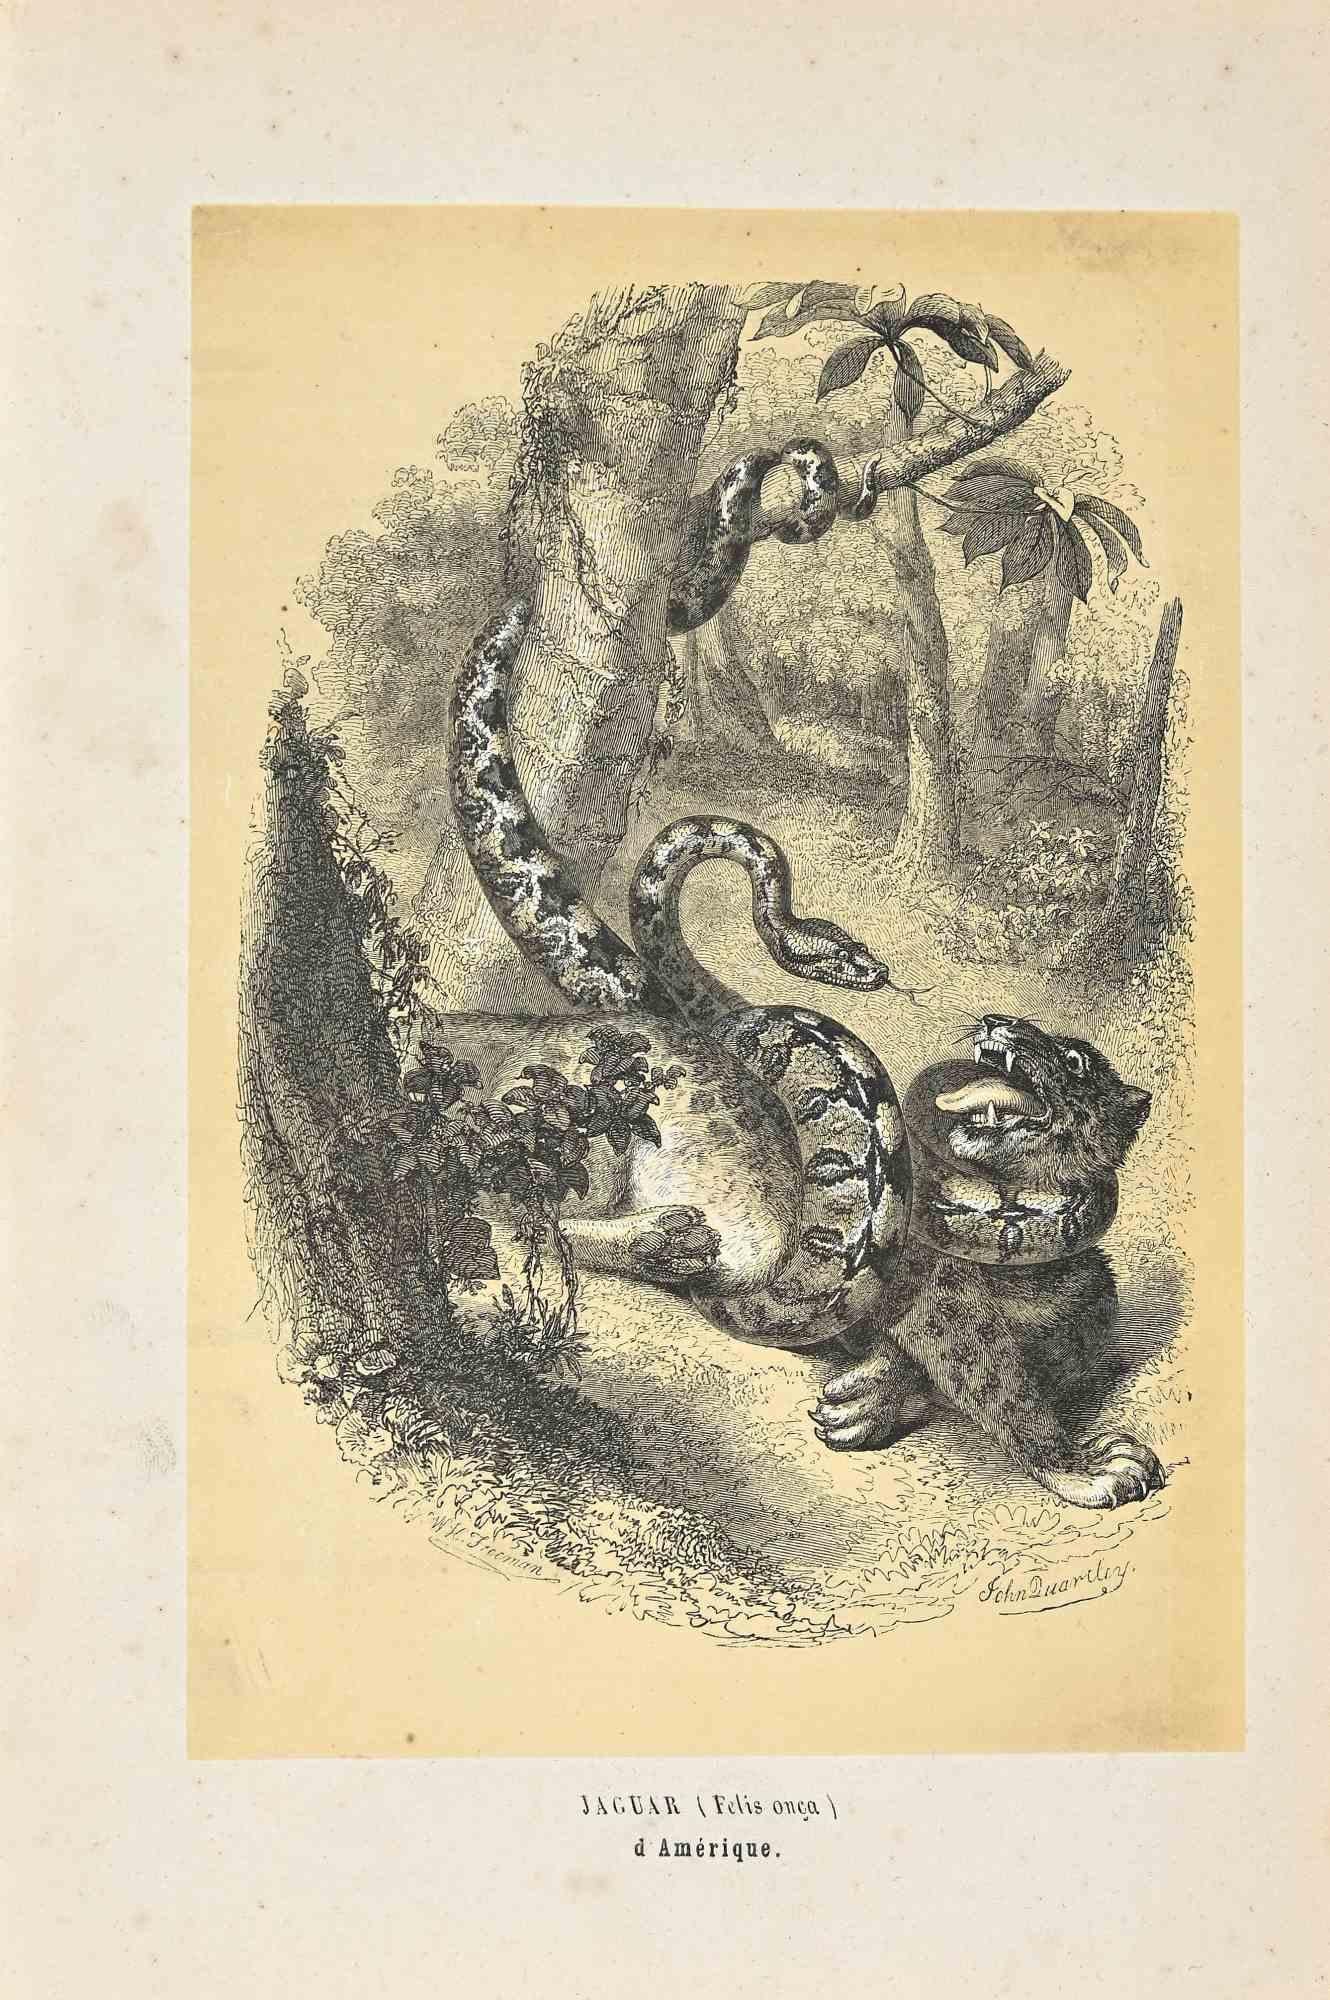 Jaguar is an original lithograph on ivory-colored paper, realized by Paul Gervais (1816-1879). The artwork is from The Series of "Les Trois Règnes de la Nature", and was published in 1854.

Good conditions except for some foxings.

Titled on the